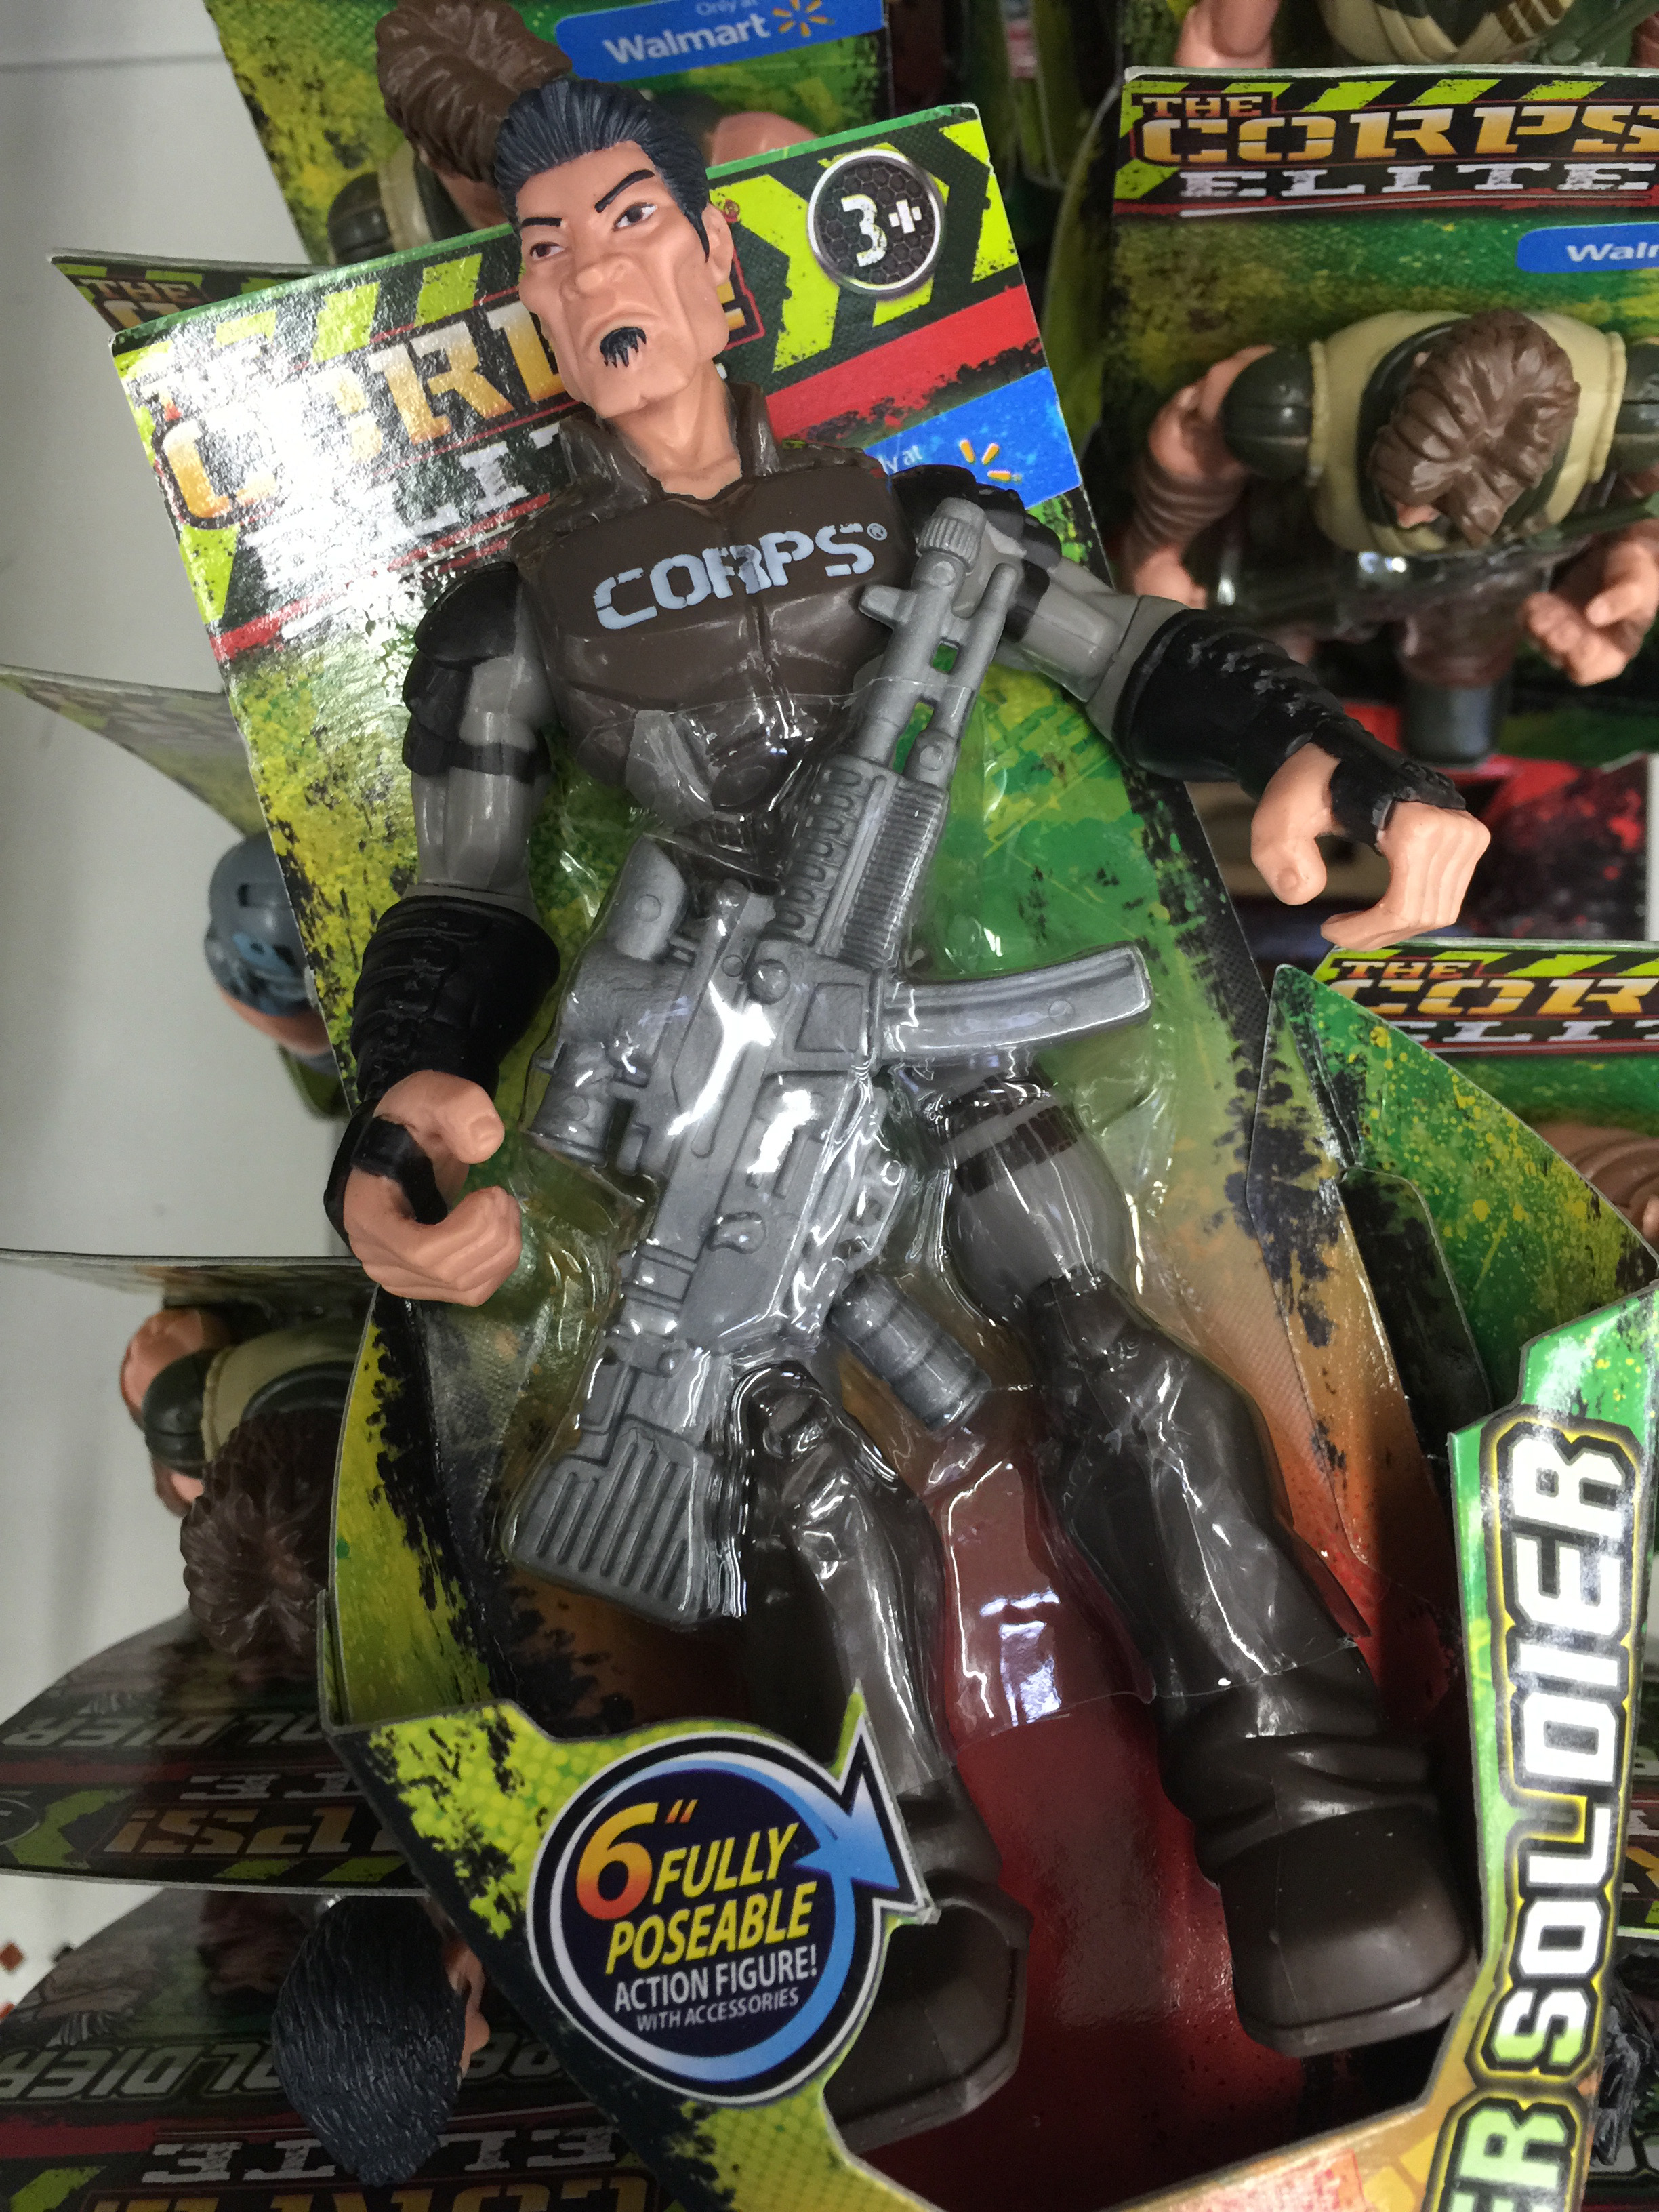 New 6-Inch "The Corps" Action Figures at Walmart - Corps02